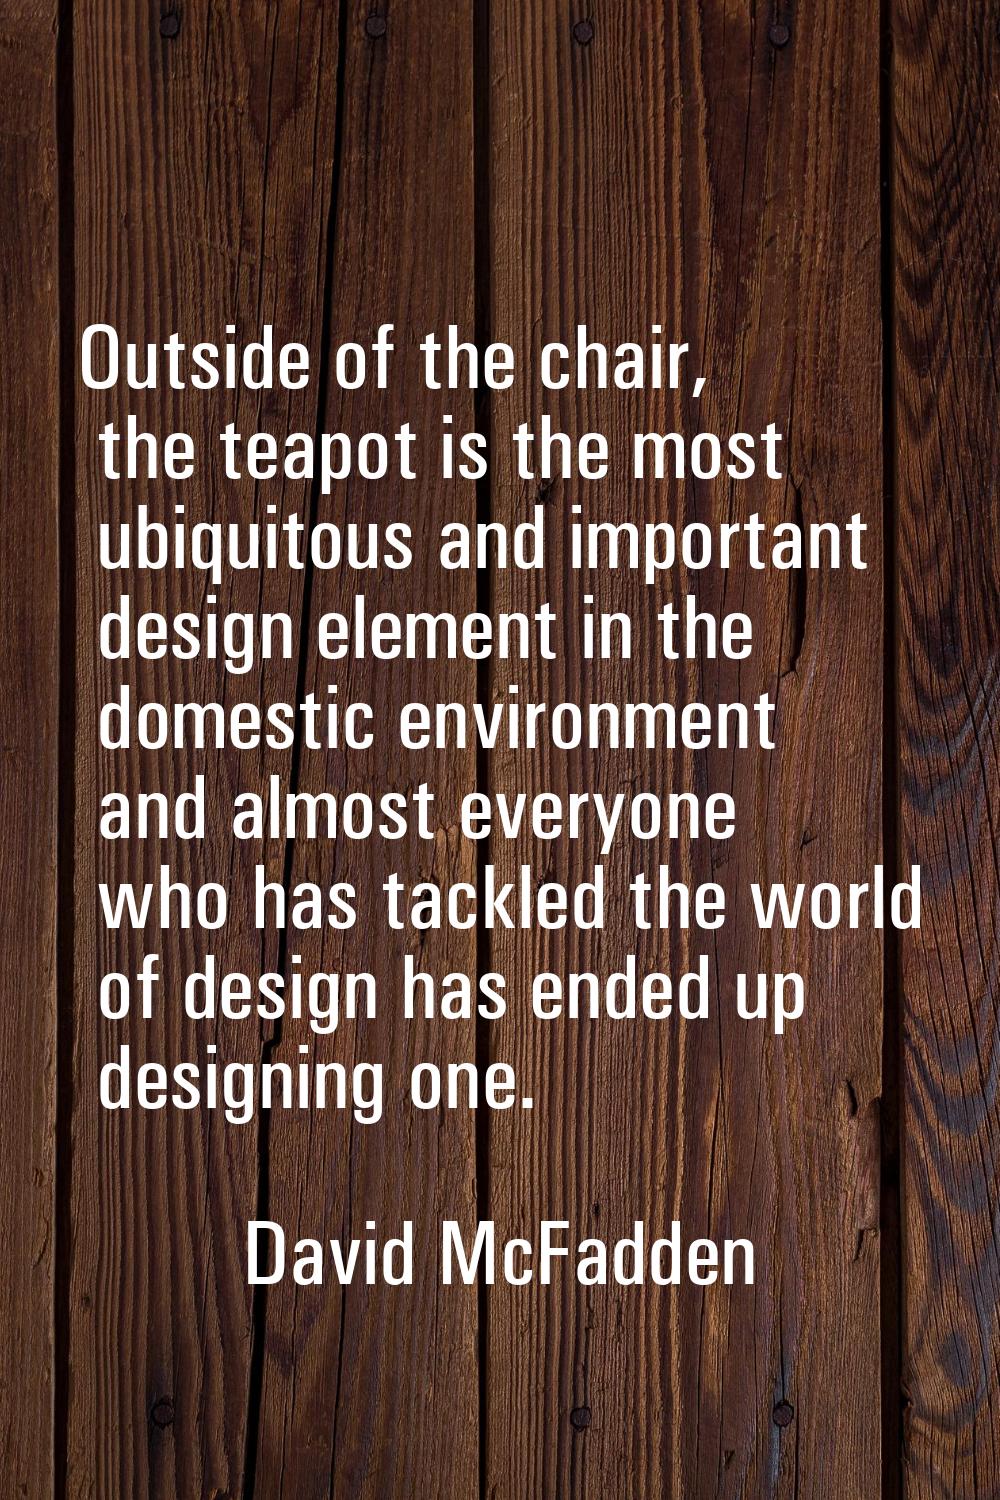 Outside of the chair, the teapot is the most ubiquitous and important design element in the domesti